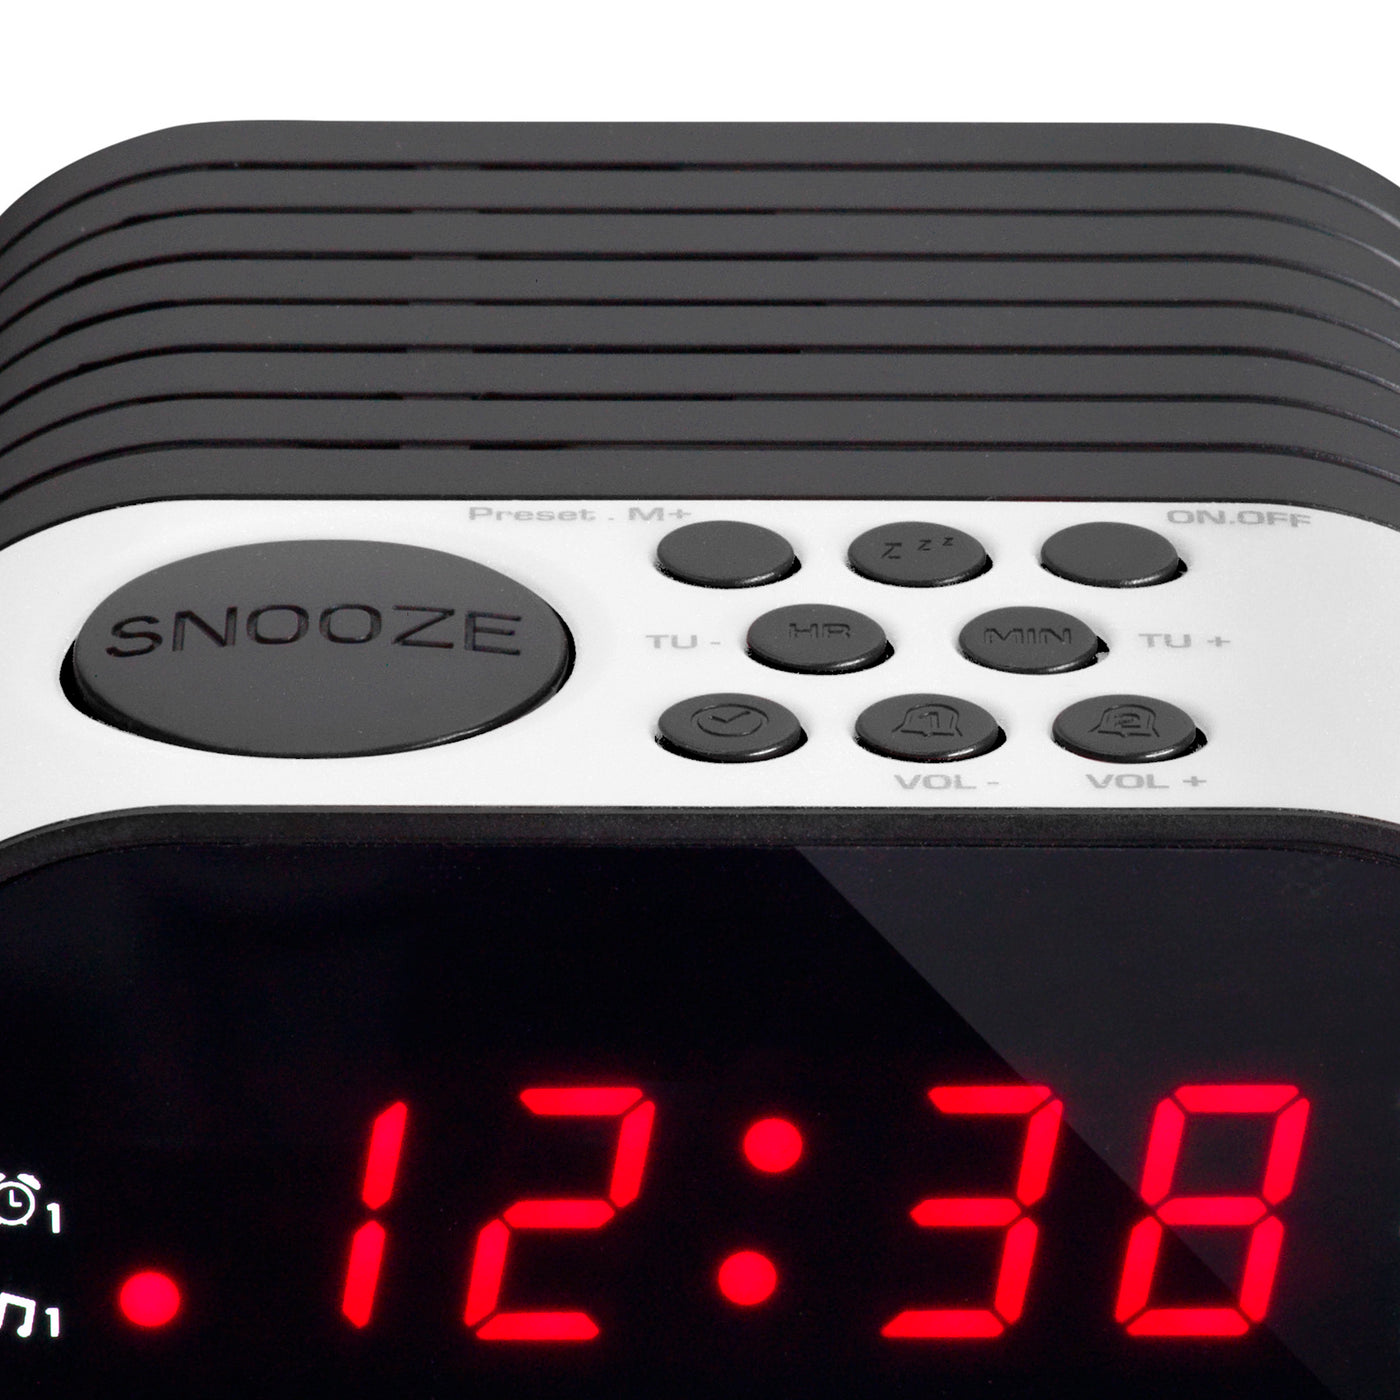 LENCO CR-07 White - FM Alarm Clock Radio with with Sleep timer and double alarm function - White